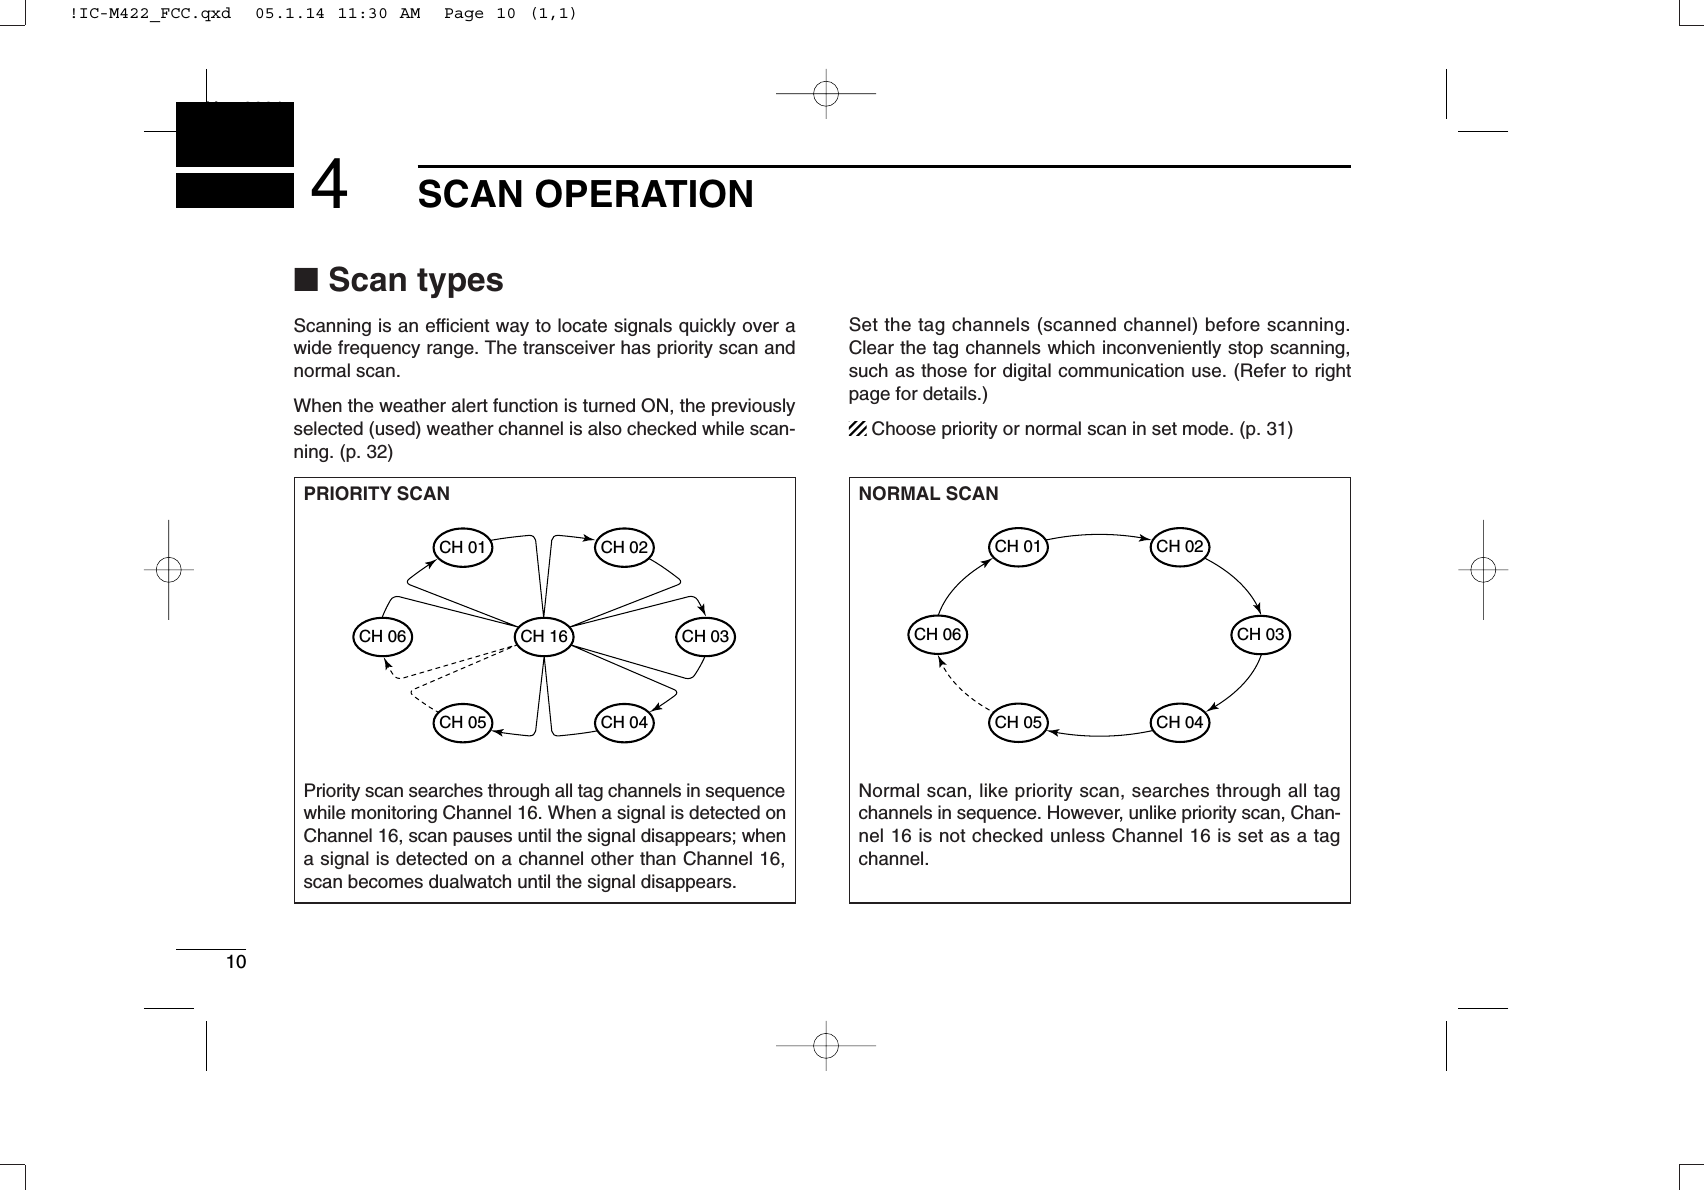 10SCAN OPERATIONNew20014■Scan typesScanning is an efﬁcient way to locate signals quickly over awide frequency range. The transceiver has priority scan andnormal scan.When the weather alert function is turned ON, the previouslyselected (used) weather channel is also checked while scan-ning. (p. 32)Set the tag channels (scanned channel) before scanning.Clear the tag channels which inconveniently stop scanning,such as those for digital communication use. (Refer to rightpage for details.)Choose priority or normal scan in set mode. (p. 31)PRIORITY SCANPriority scan searches through all tag channels in sequencewhile monitoring Channel 16. When a signal is detected onChannel 16, scan pauses until the signal disappears; whena signal is detected on a channel other than Channel 16,scan becomes dualwatch until the signal disappears.CH 06CH 01CH 16CH 02CH 05 CH 04CH 03NORMAL SCANNormal scan, like priority scan, searches through all tagchannels in sequence. However, unlike priority scan, Chan-nel 16 is not checked unless Channel 16 is set as a tagchannel.CH 01 CH 02CH 06CH 05 CH 04CH 03!IC-M422_FCC.qxd  05.1.14 11:30 AM  Page 10 (1,1)